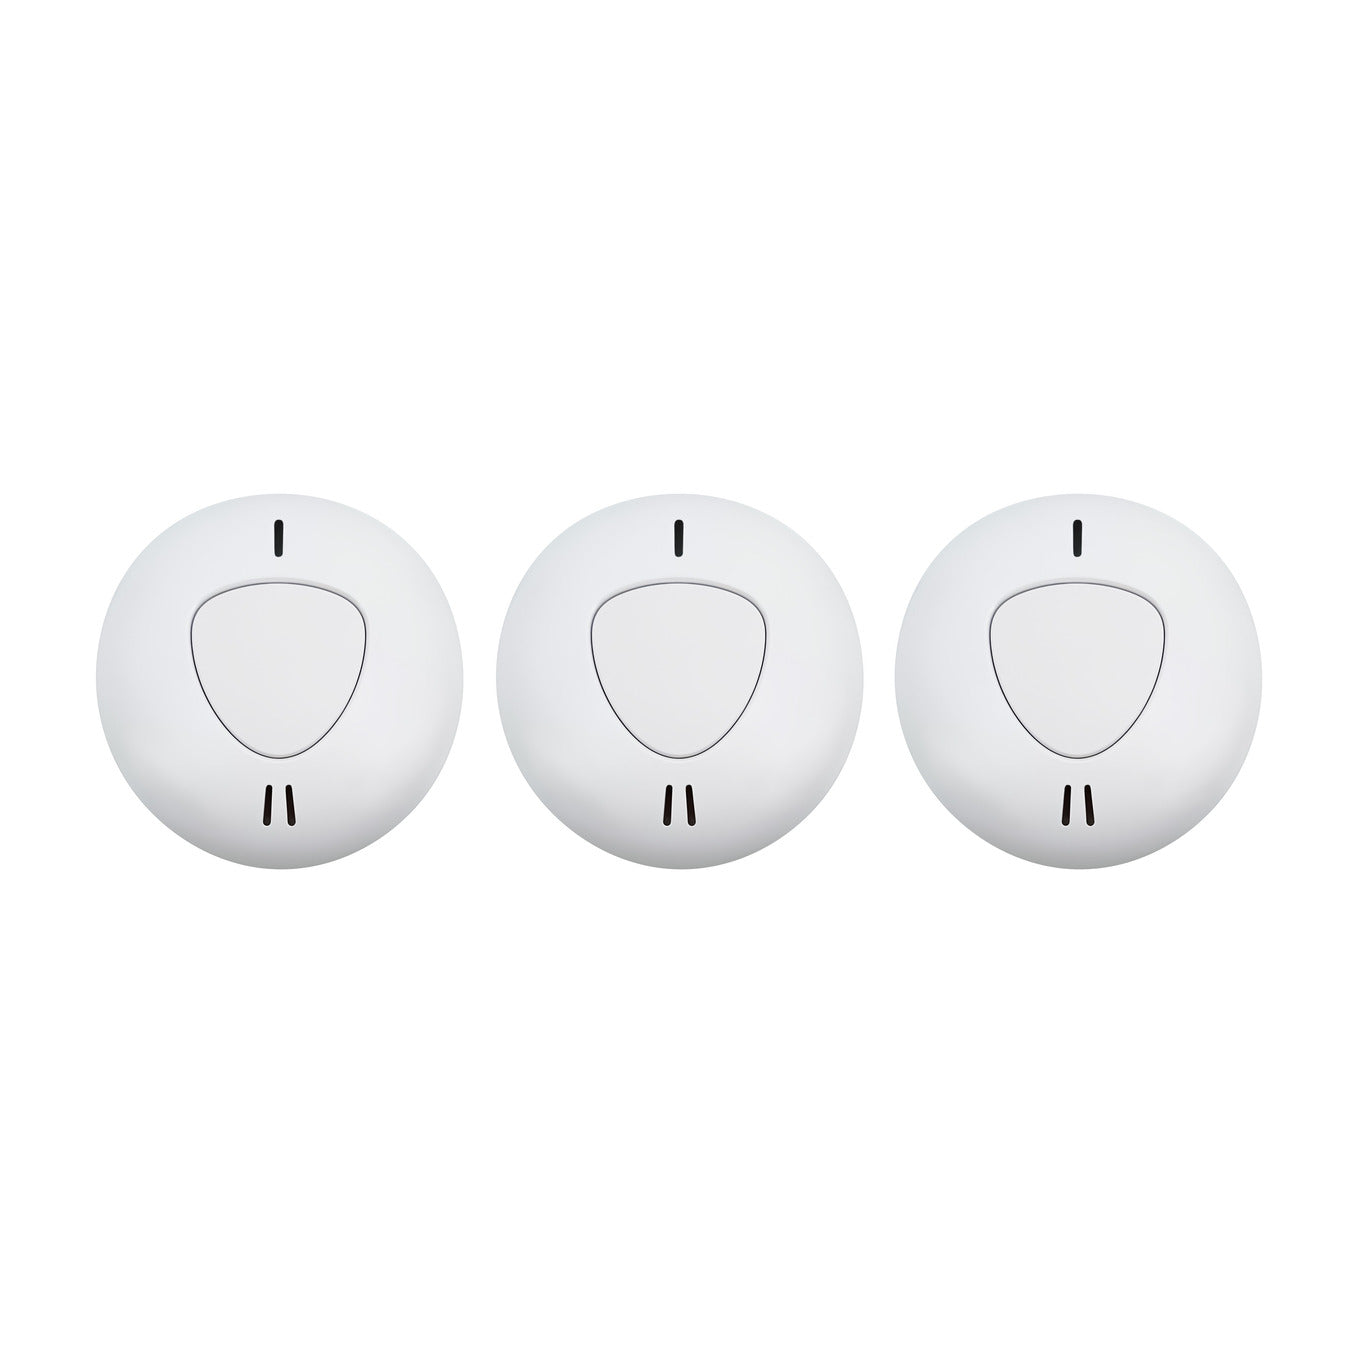 Firexo Interlinked Optical Smoke Alarm with 10 Year Tamper Proof Battery, can be interlinked with Firexo Carbon Monoxide Alarm and Firexo Heat Alarm (sold separately), White (3 Pack)